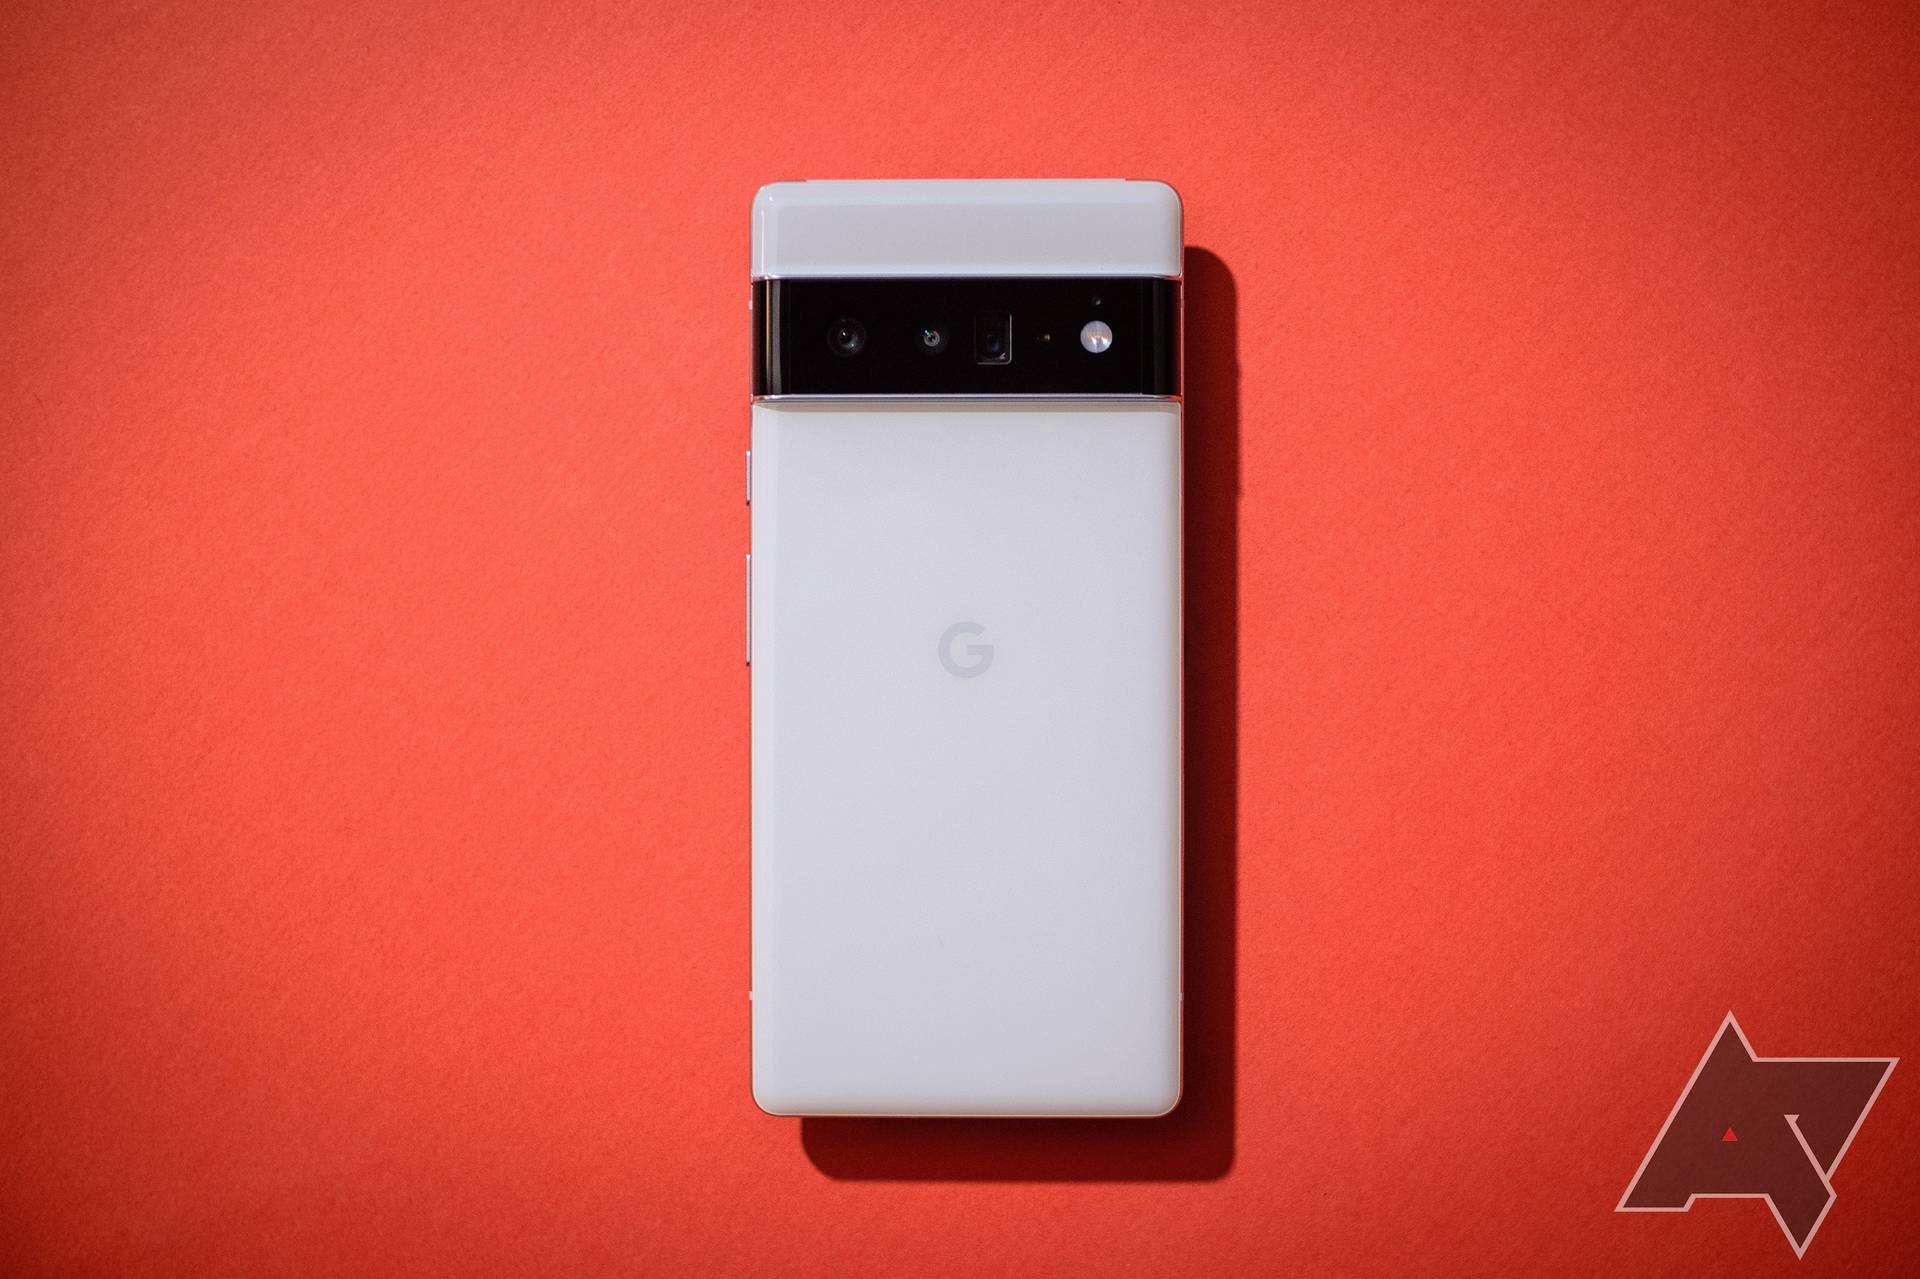 Google wants to give third-party apps access to the Pixel 6 Pro's ultra-wideband chip